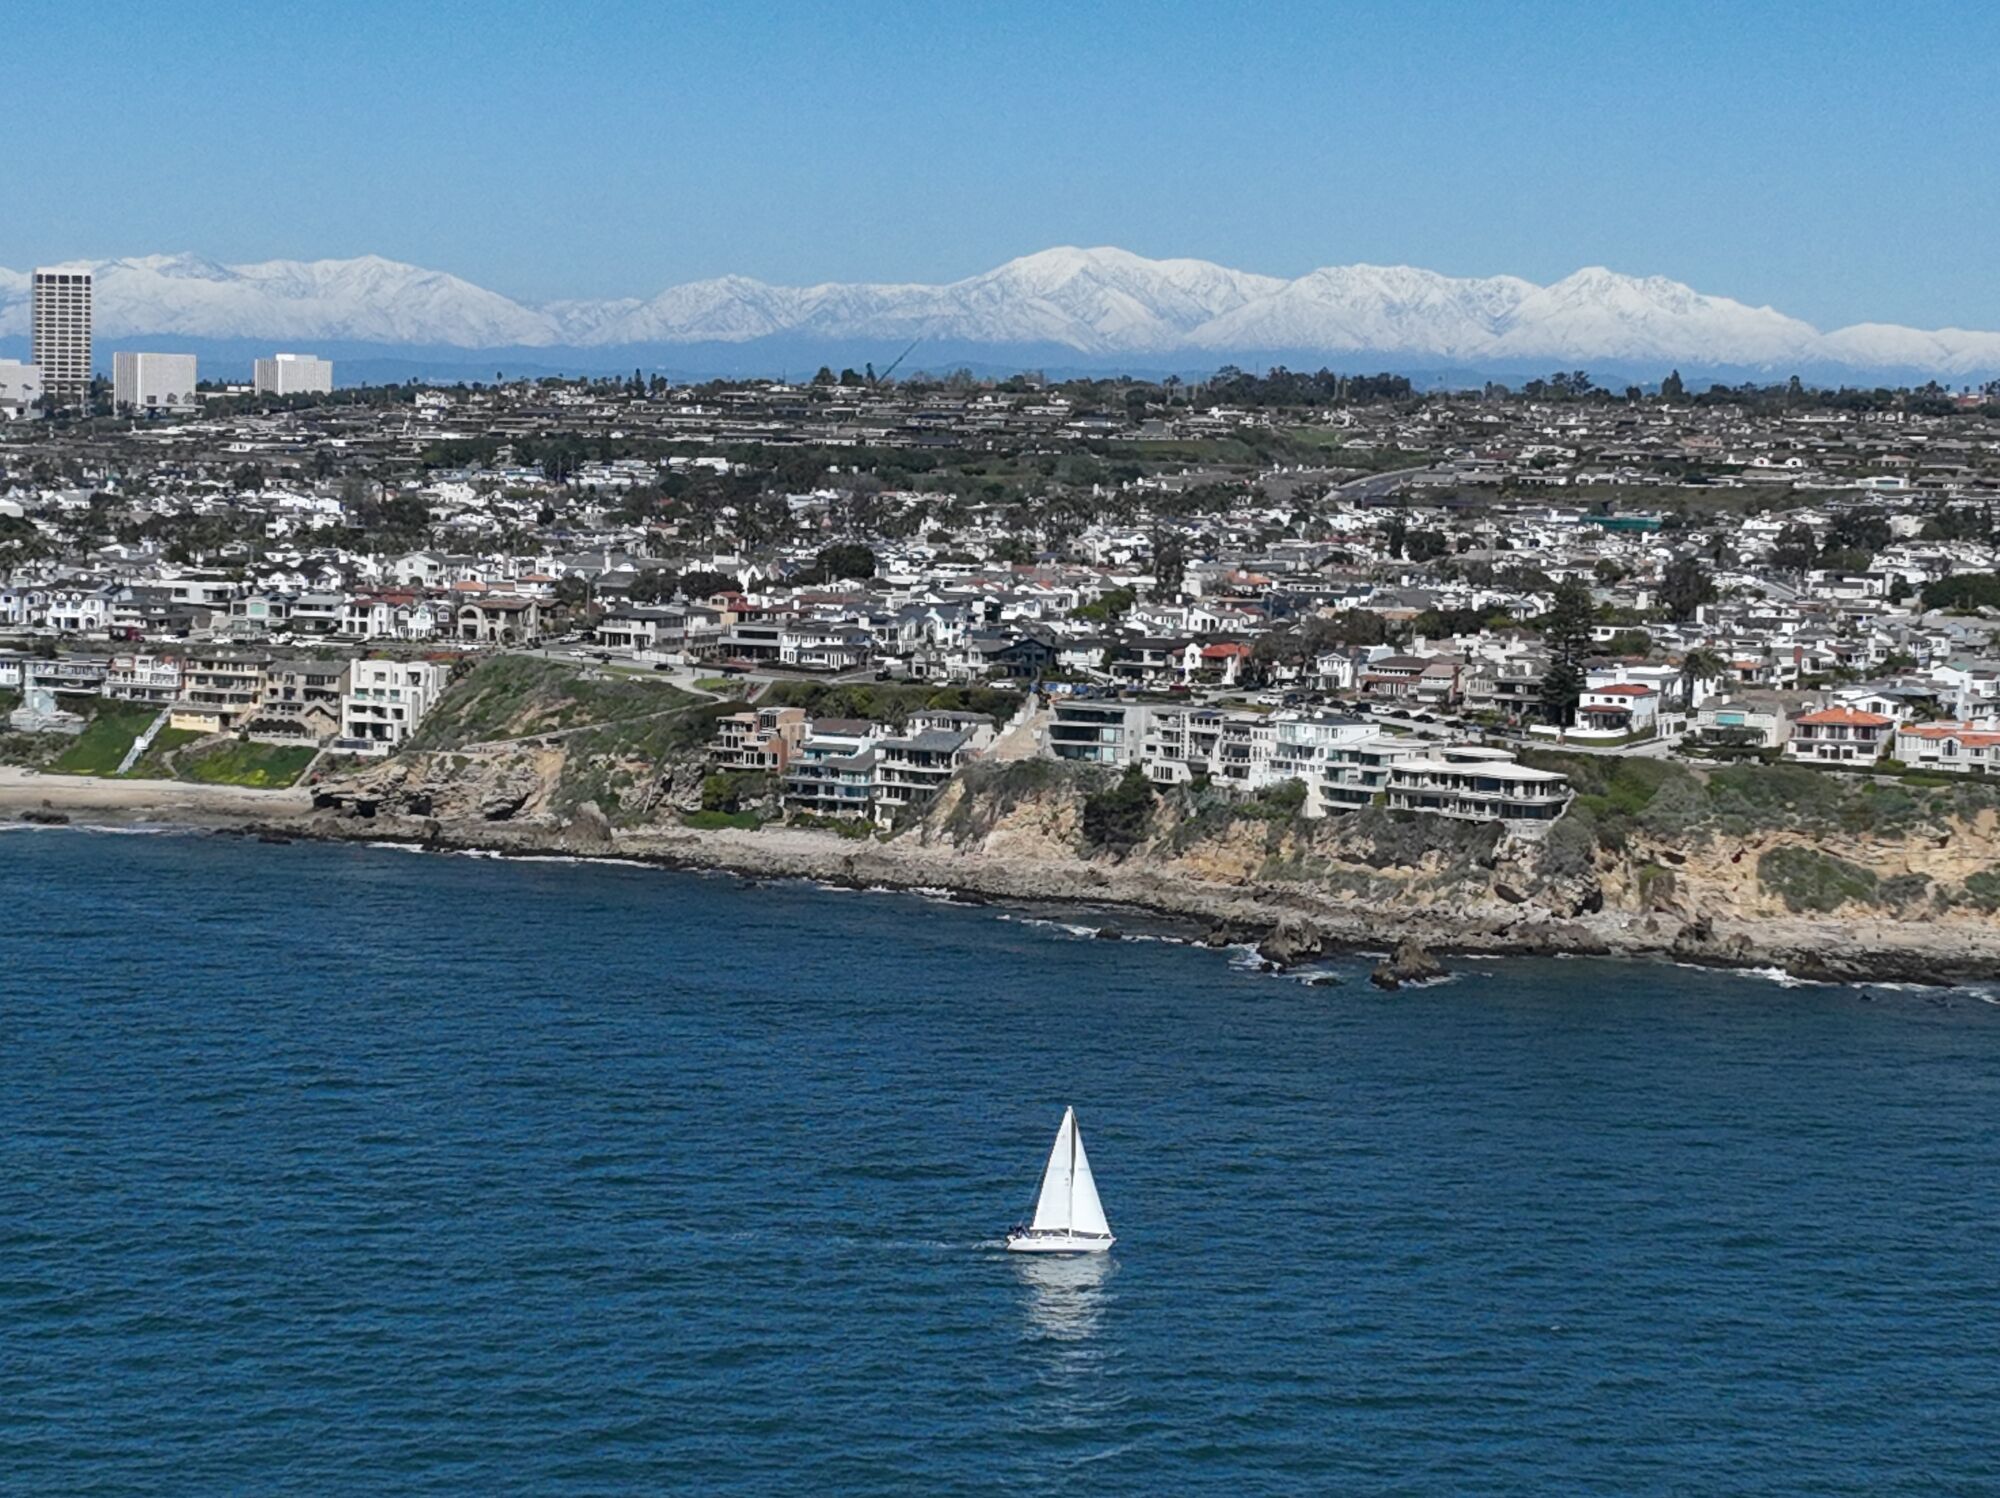 A sailboat cruises off the coast of Corona del Mar with snow-covered mountains in the background.